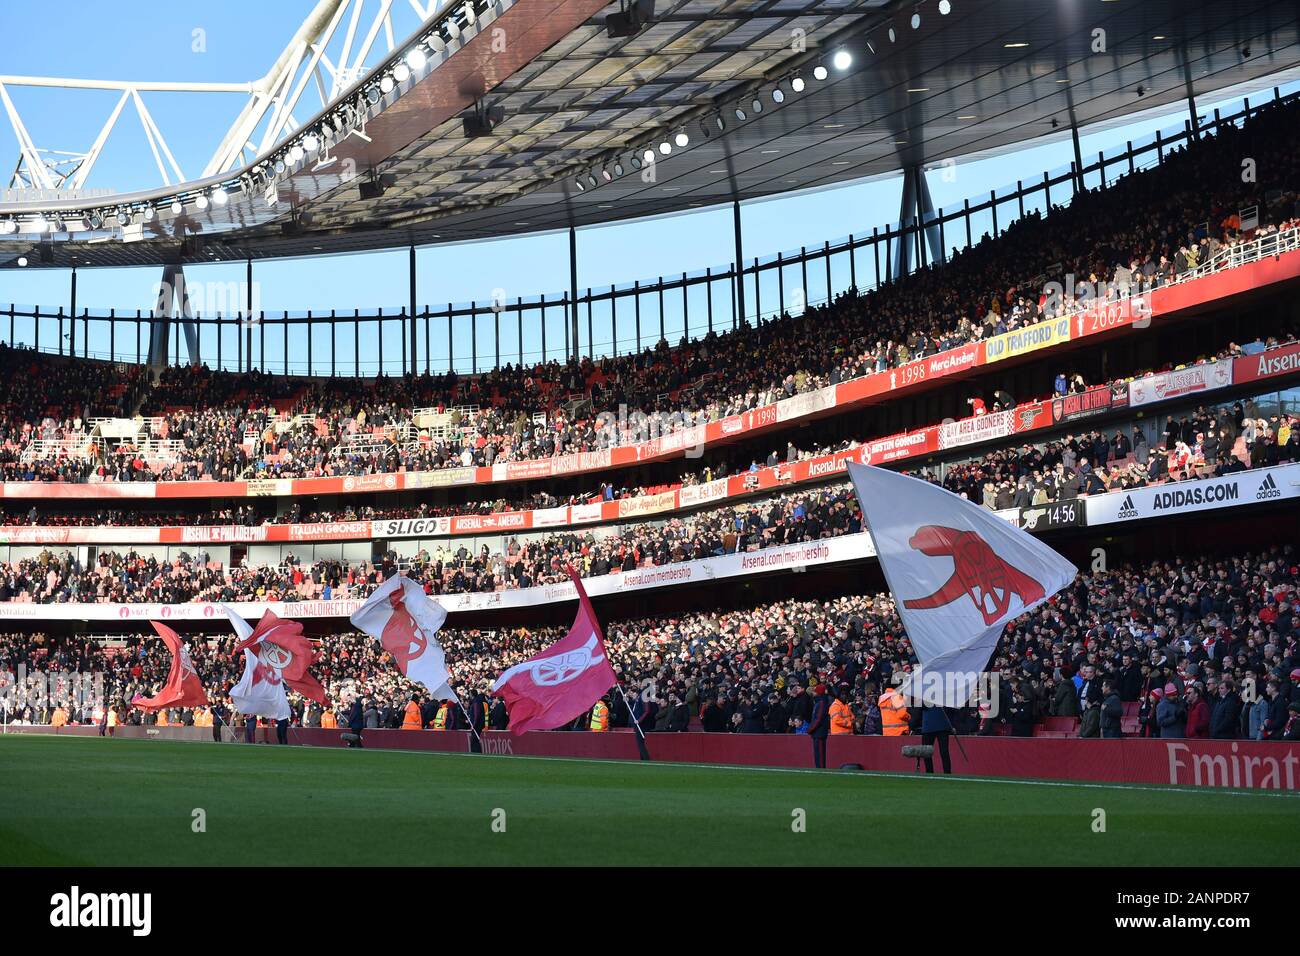 LONDON, ENGLAND - JANUARY 18TH Arsenal flags waved during the Premier League match between Arsenal and Sheffield United at the Emirates Stadium, London on Saturday 18th January 2020. (Credit: Ivan Yordanov | MI News)Photograph may only be used for newspaper and/or magazine editorial purposes, license required for commercial use Credit: MI News & Sport /Alamy Live News Stock Photo